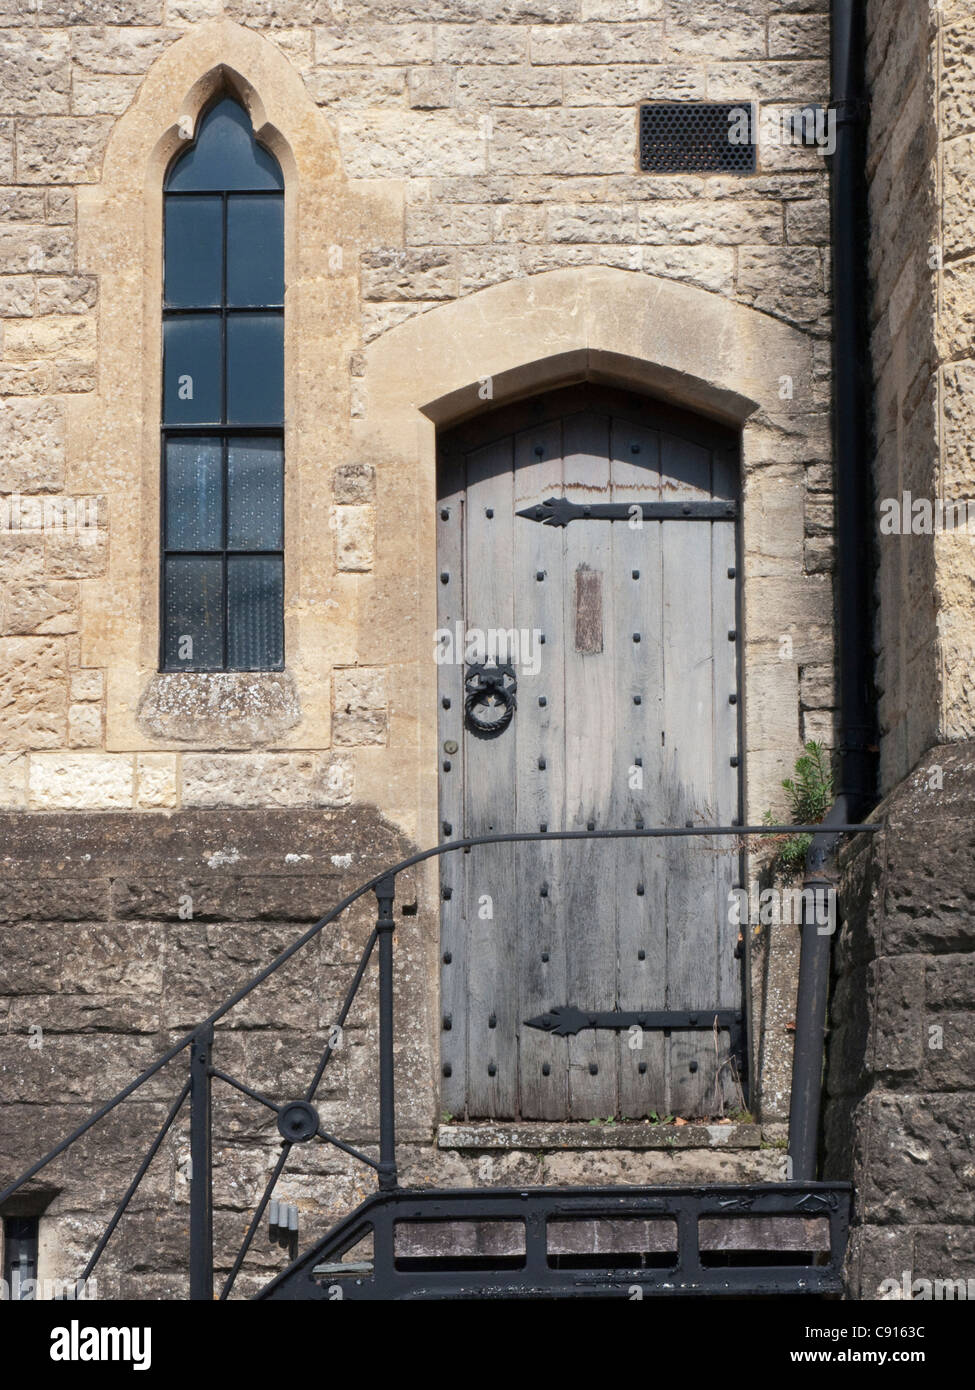 Cirencester has had a long history as a market and trading town. There are fine historic buildings in the town streets. Stock Photo